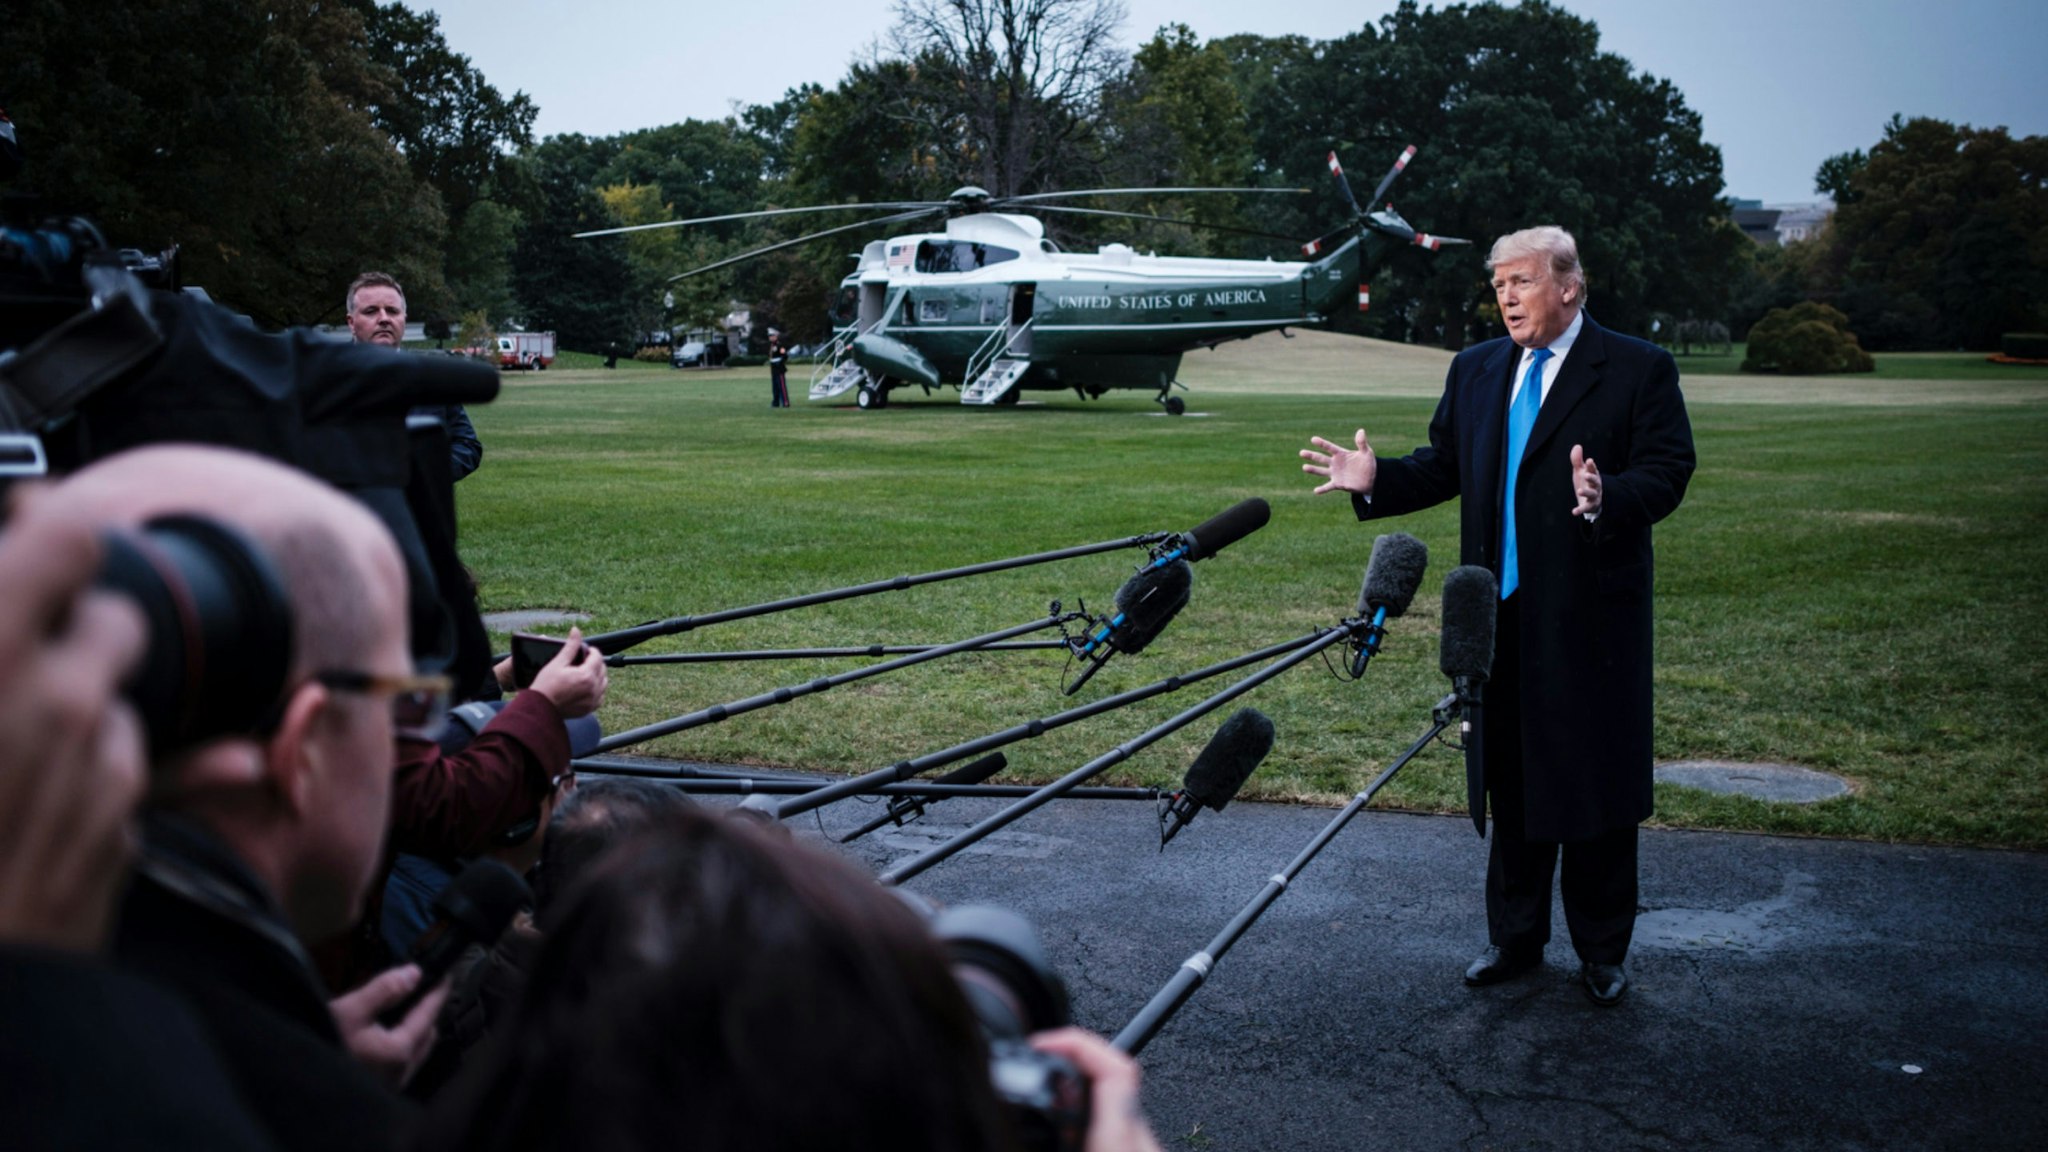 US President Donald Trump speaks to the media as he prepares to board Marine One on the South Lawn of the White House on October 26, 2018 in Washington, DC.